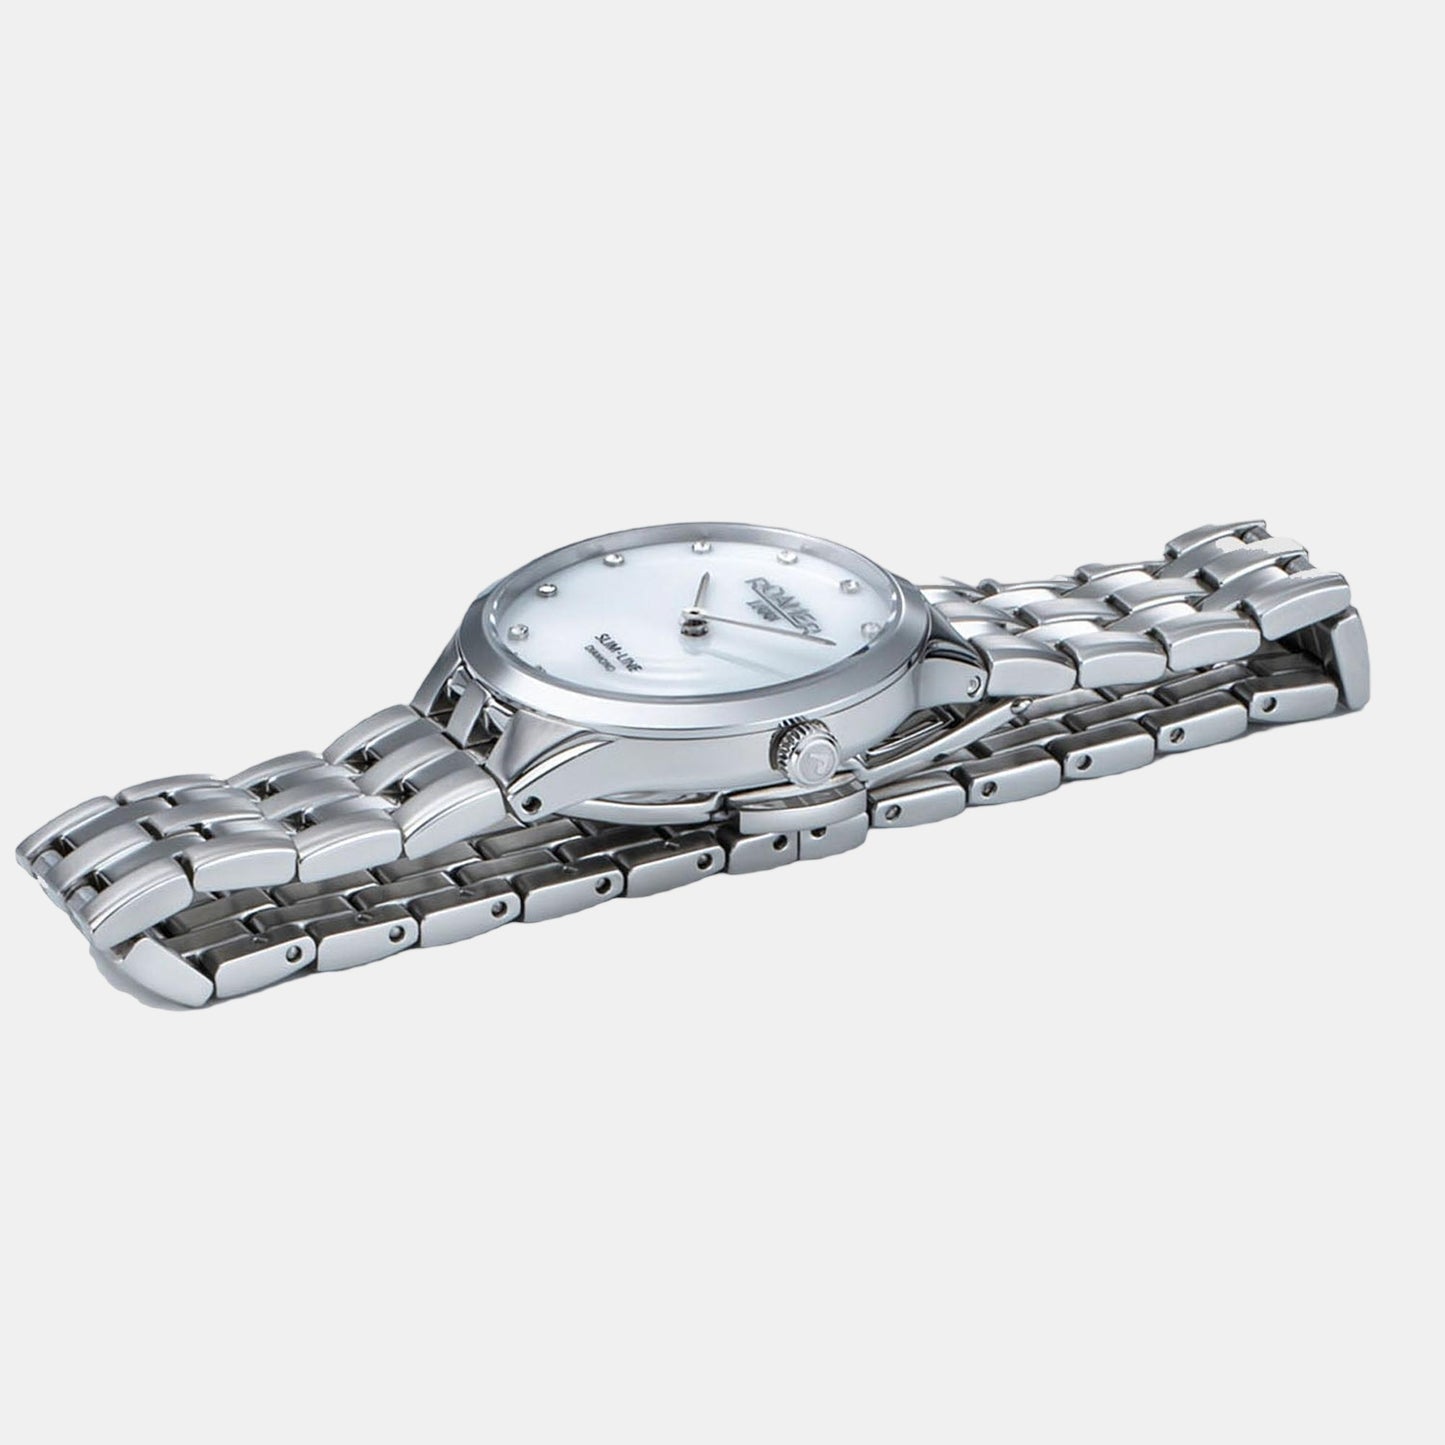 Female Analog Stainless Steel Watch 512847 41 89 20